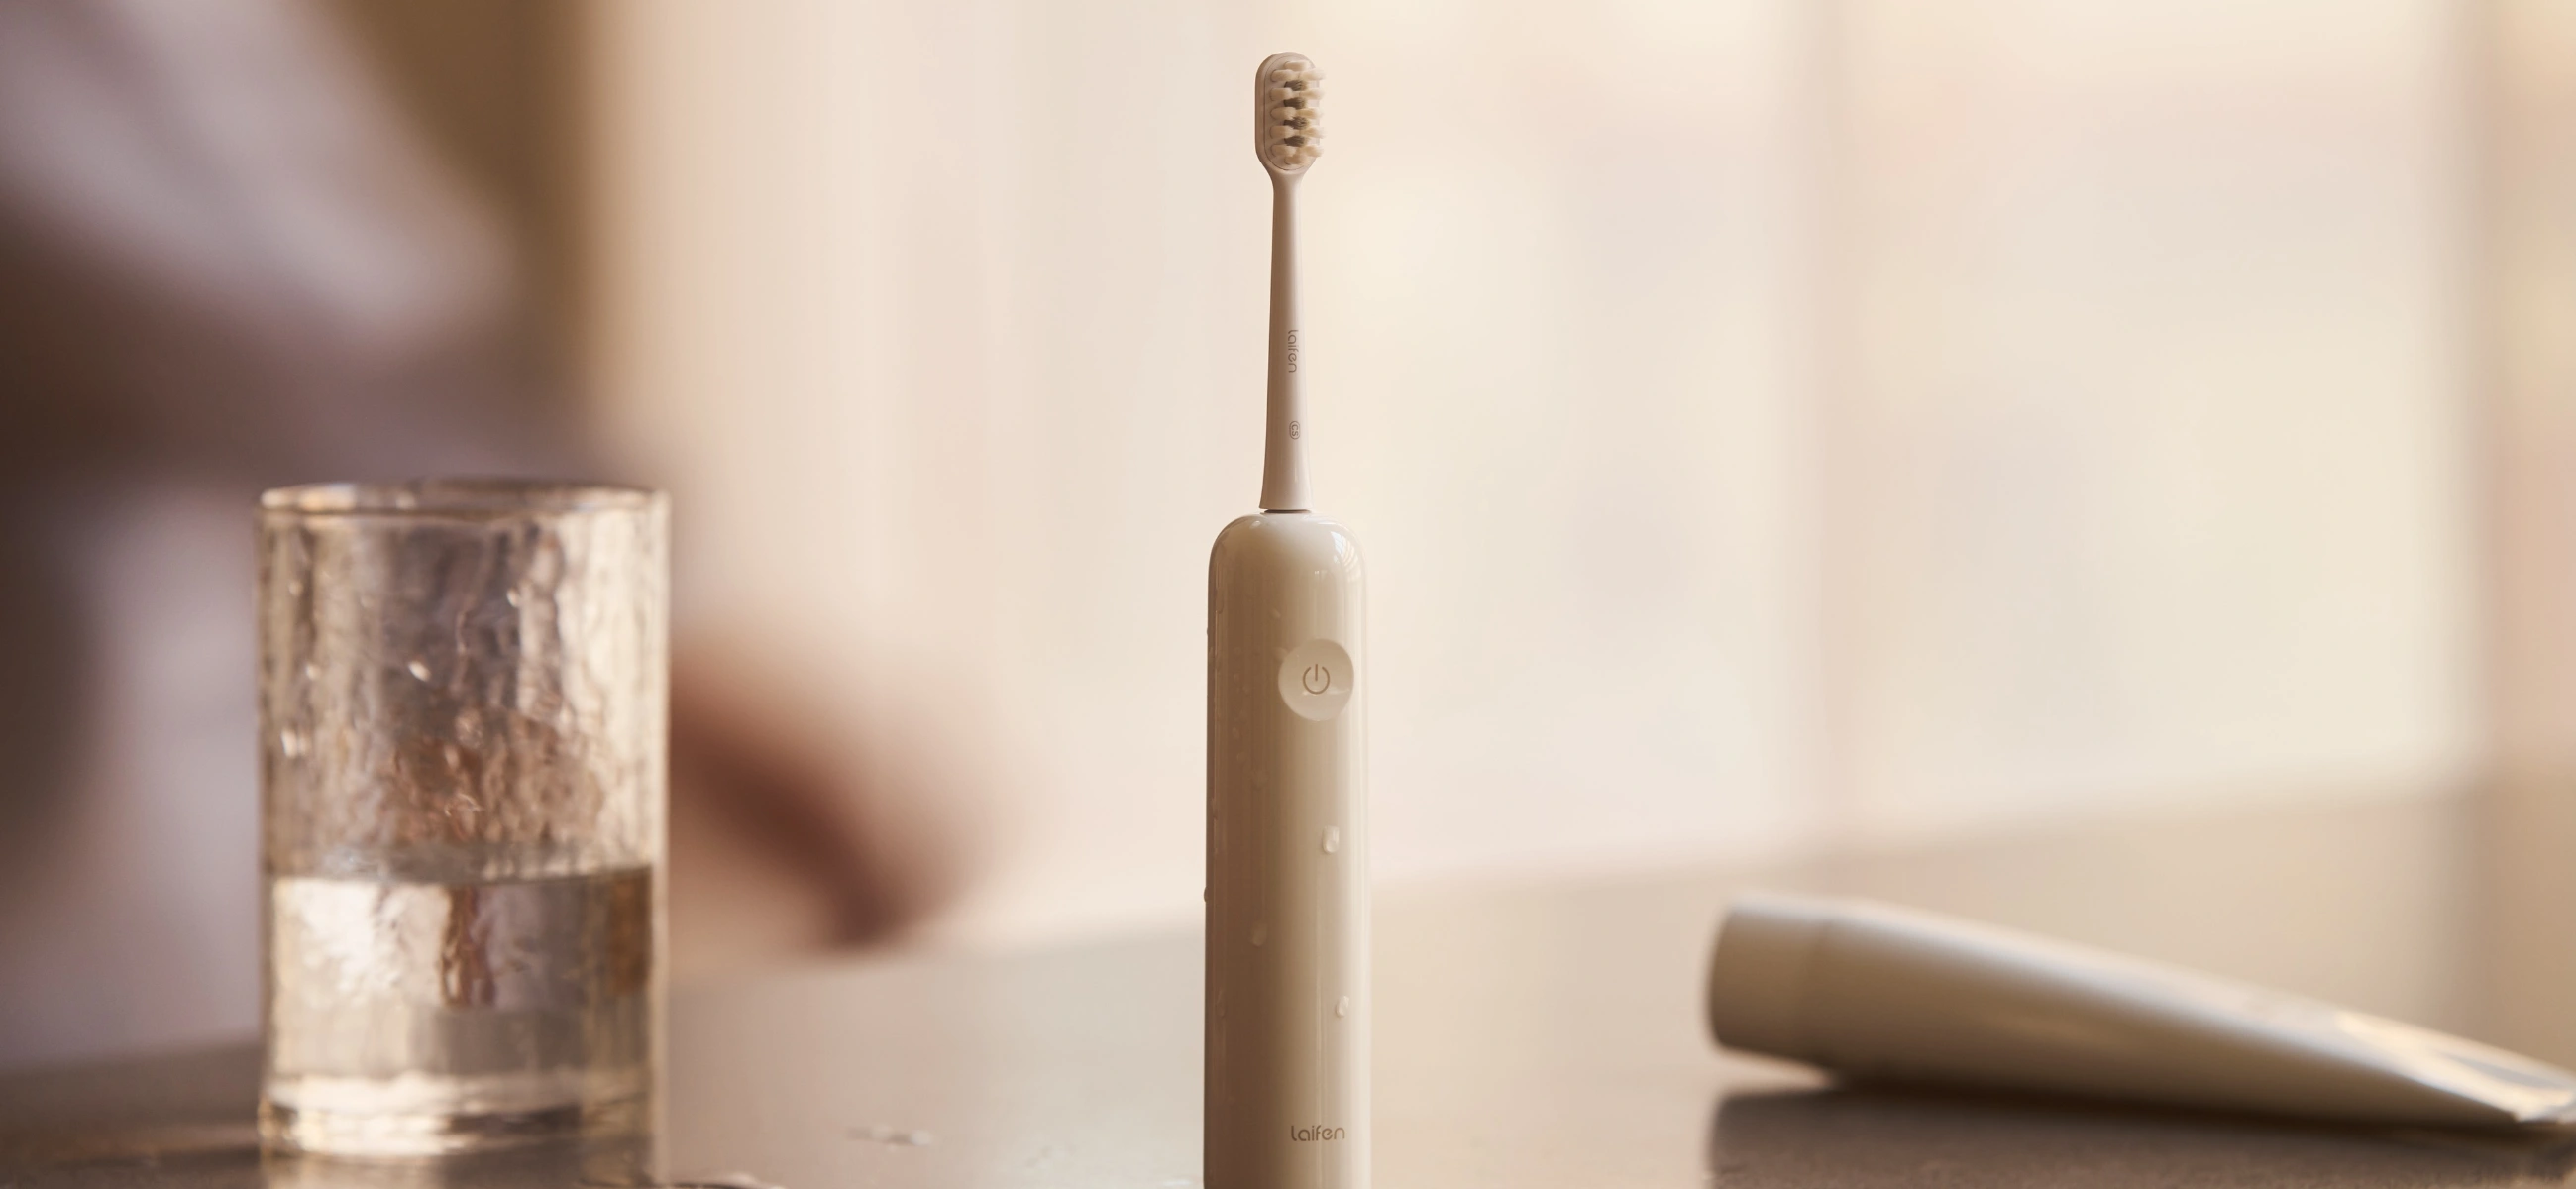 Toothbrush and toothpaste: tips for selection